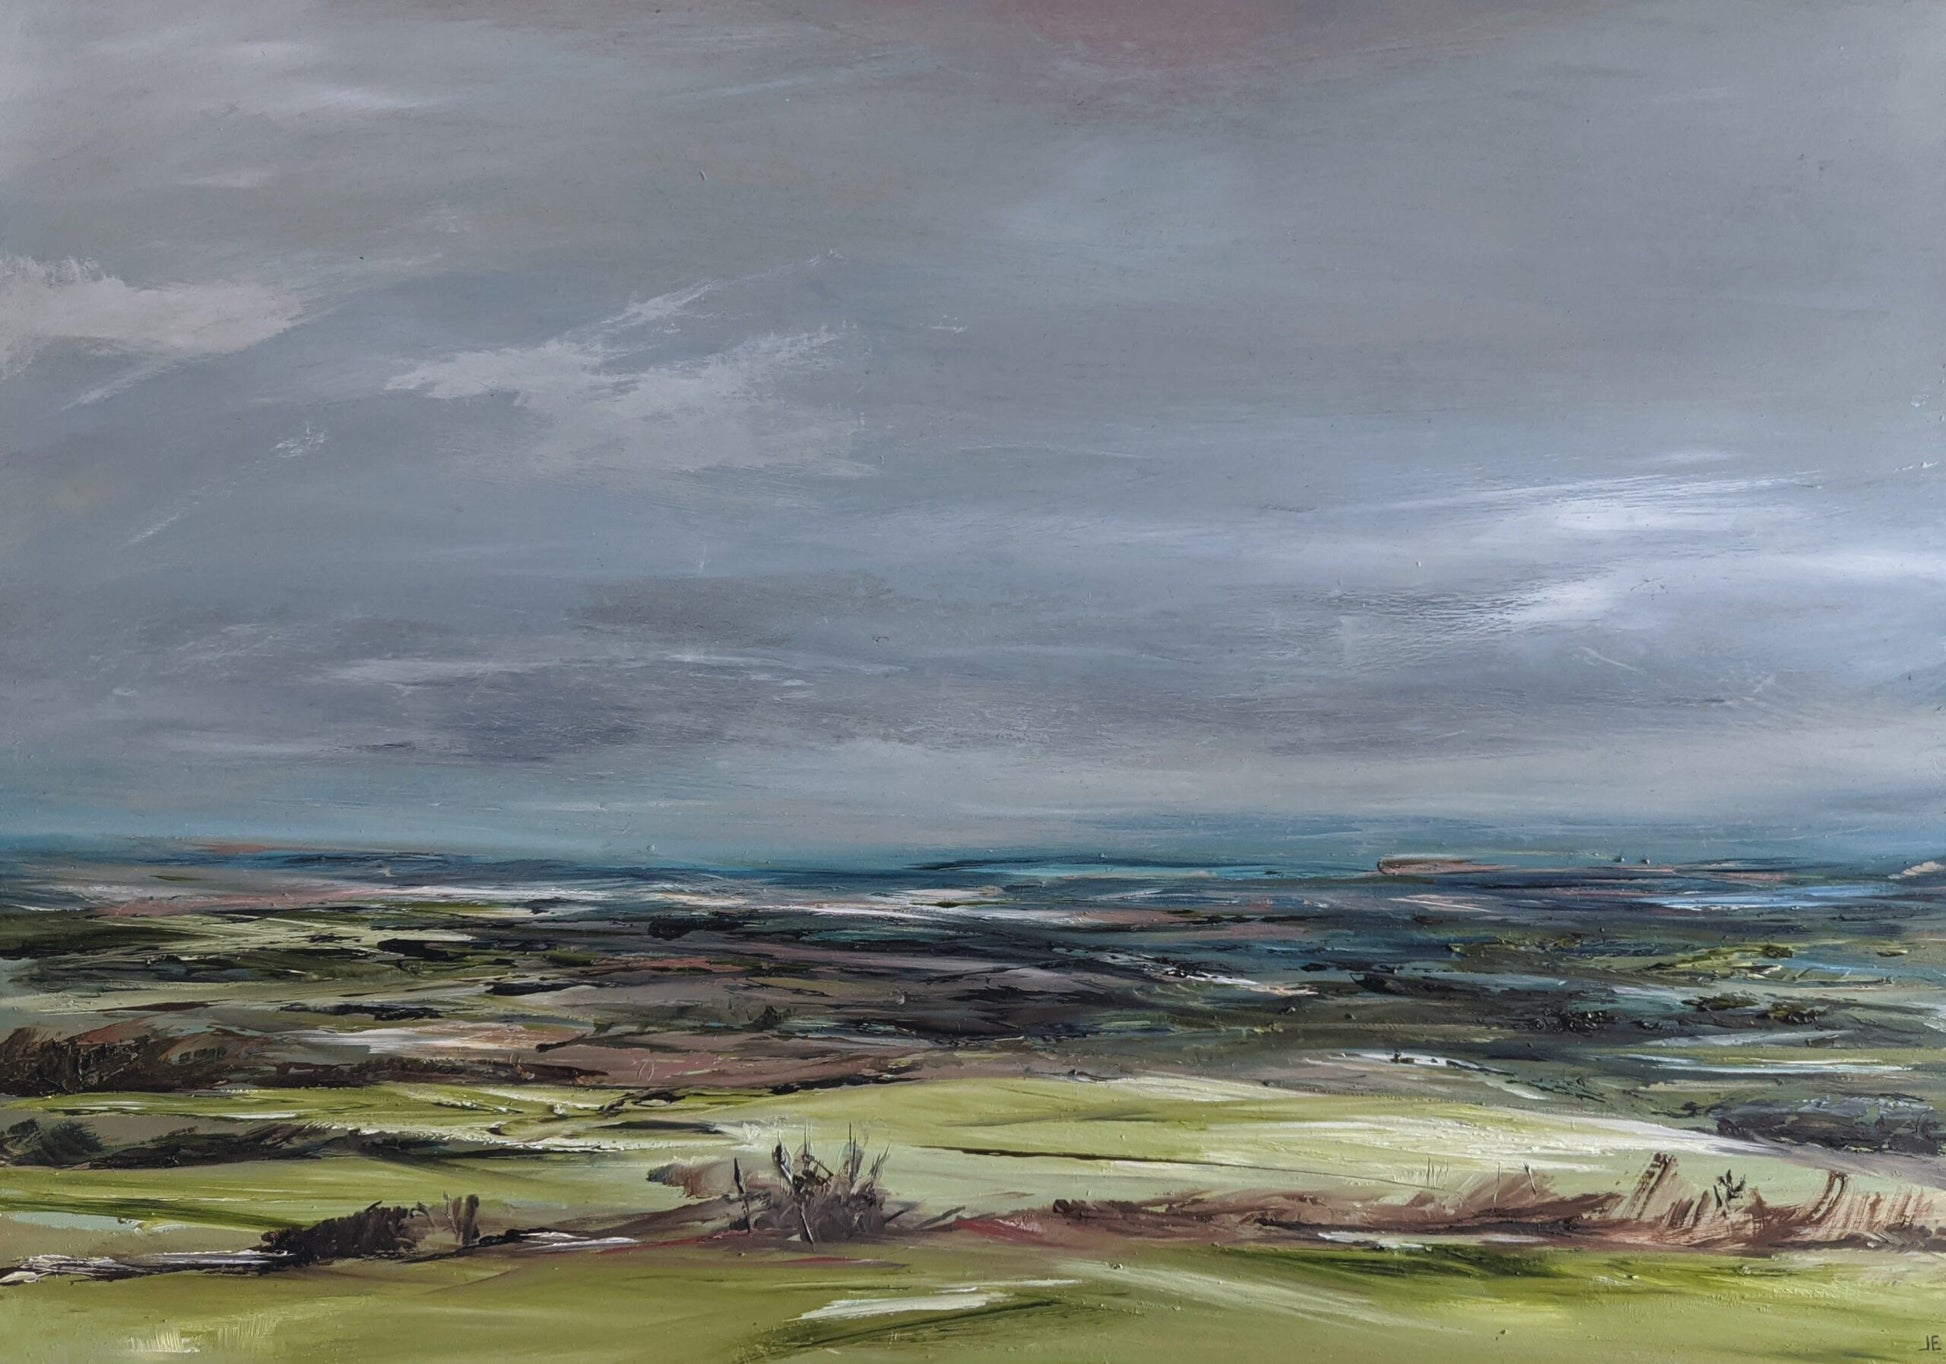 Coombe Hill View #2 Oil painting on MDF board by Jo Earl